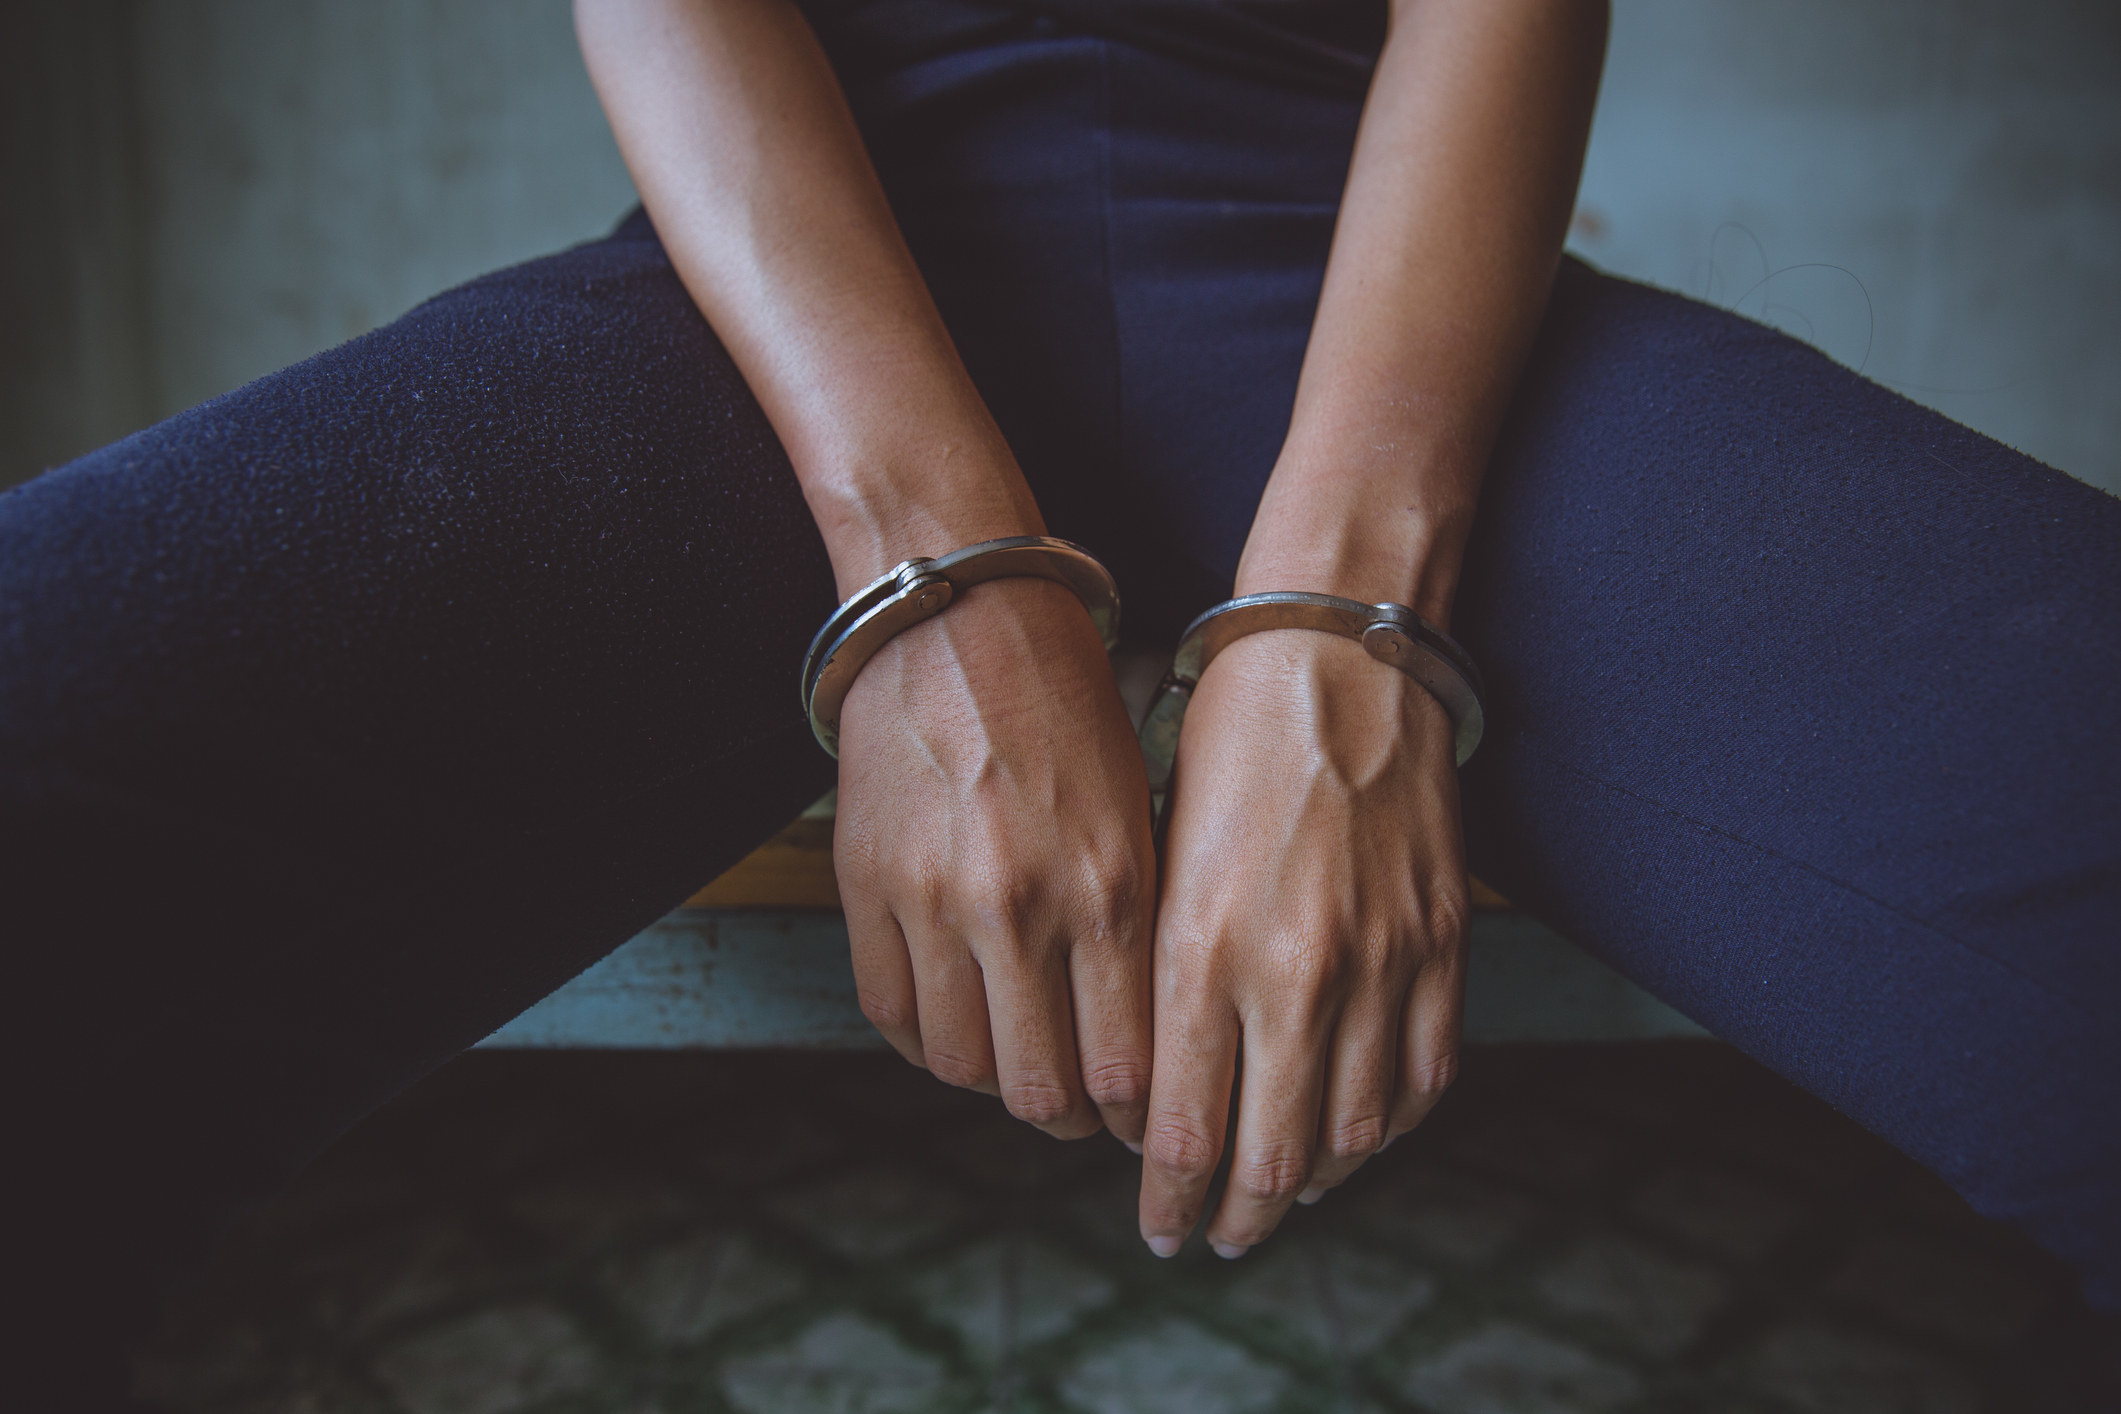 A female inmate with handcuffs